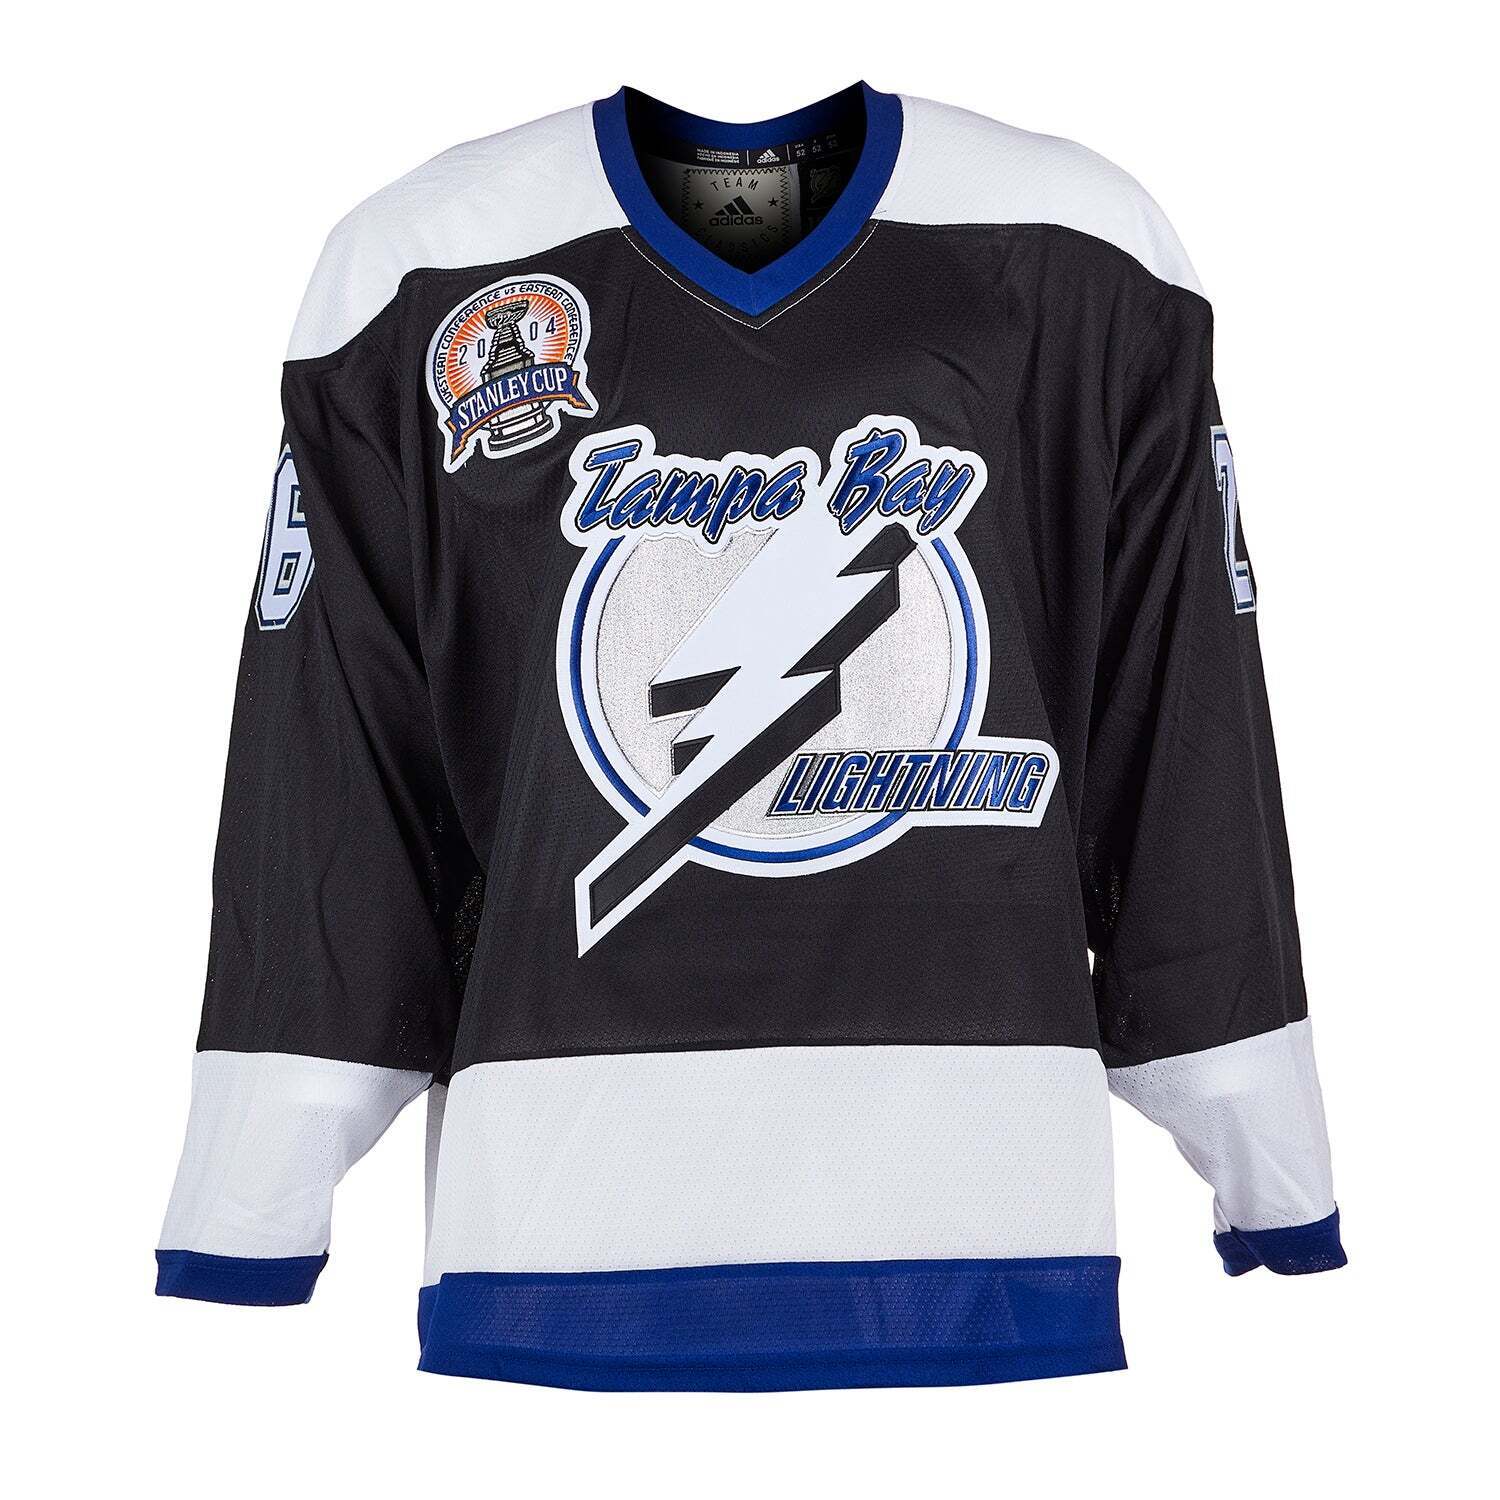 Martin St. Louis autographed Jersey (Tampa Bay Lightning)